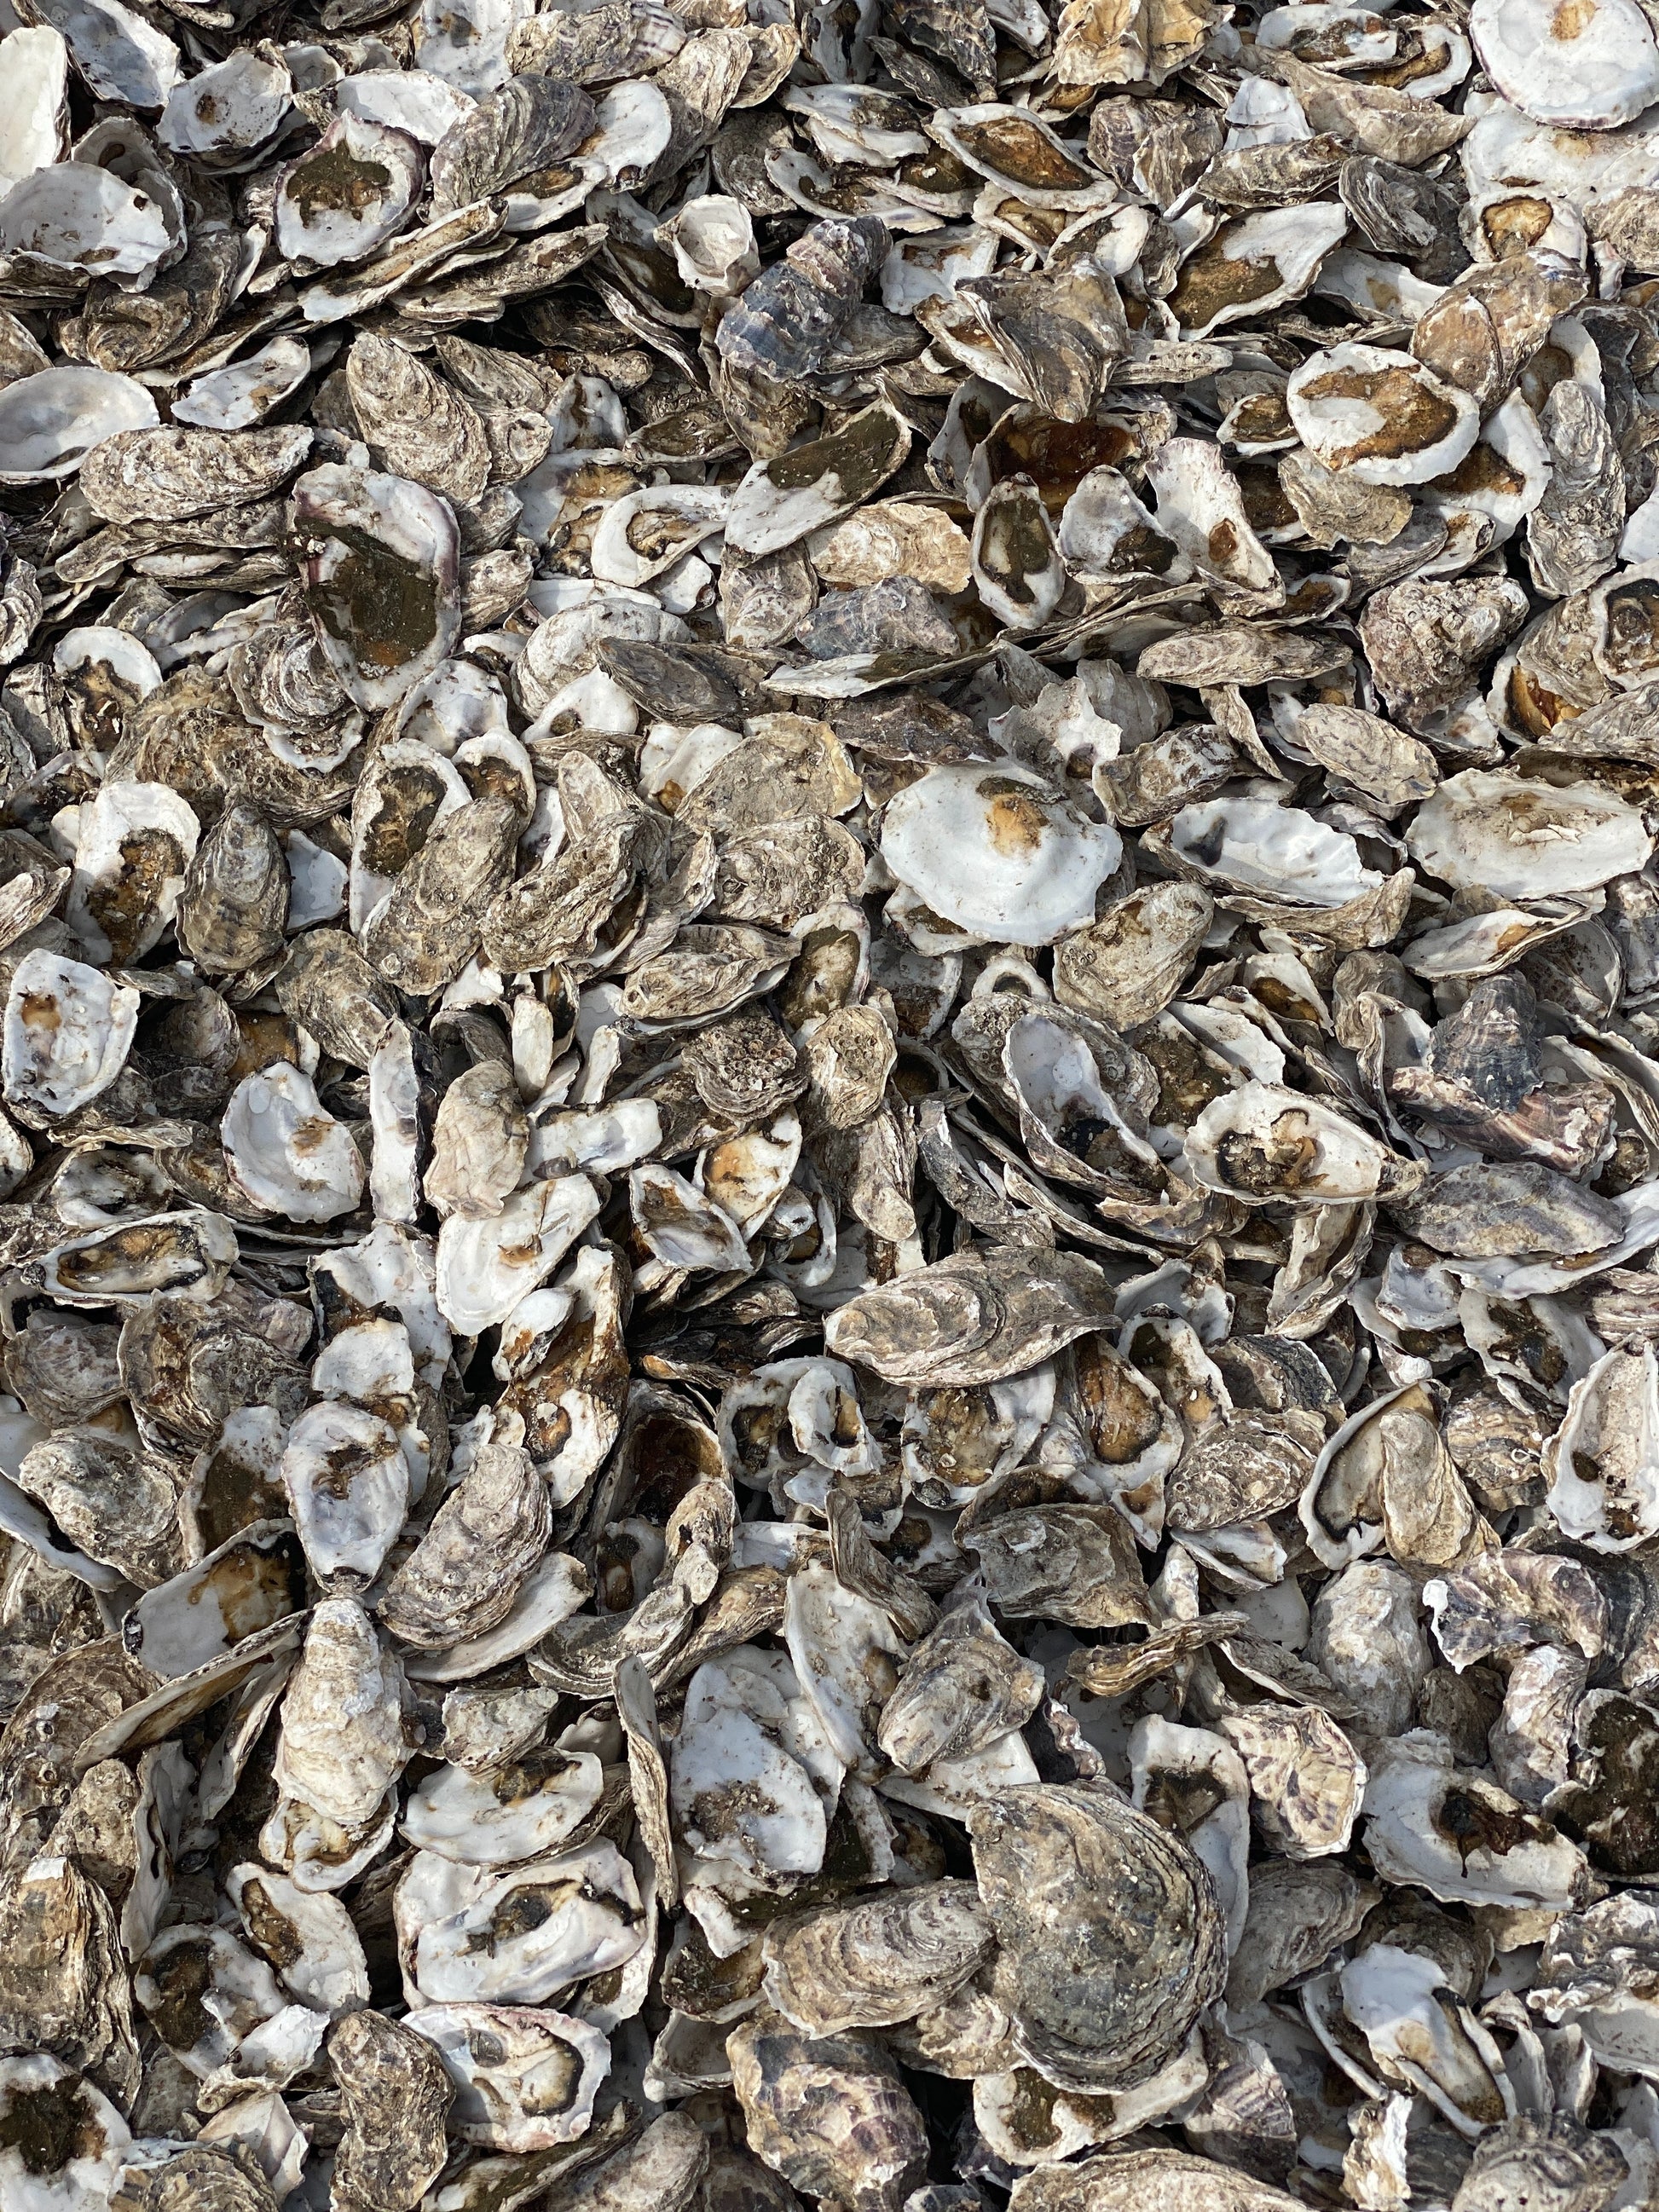 Oyster shell extract, used for making ethical and sustainable poo bags degradable